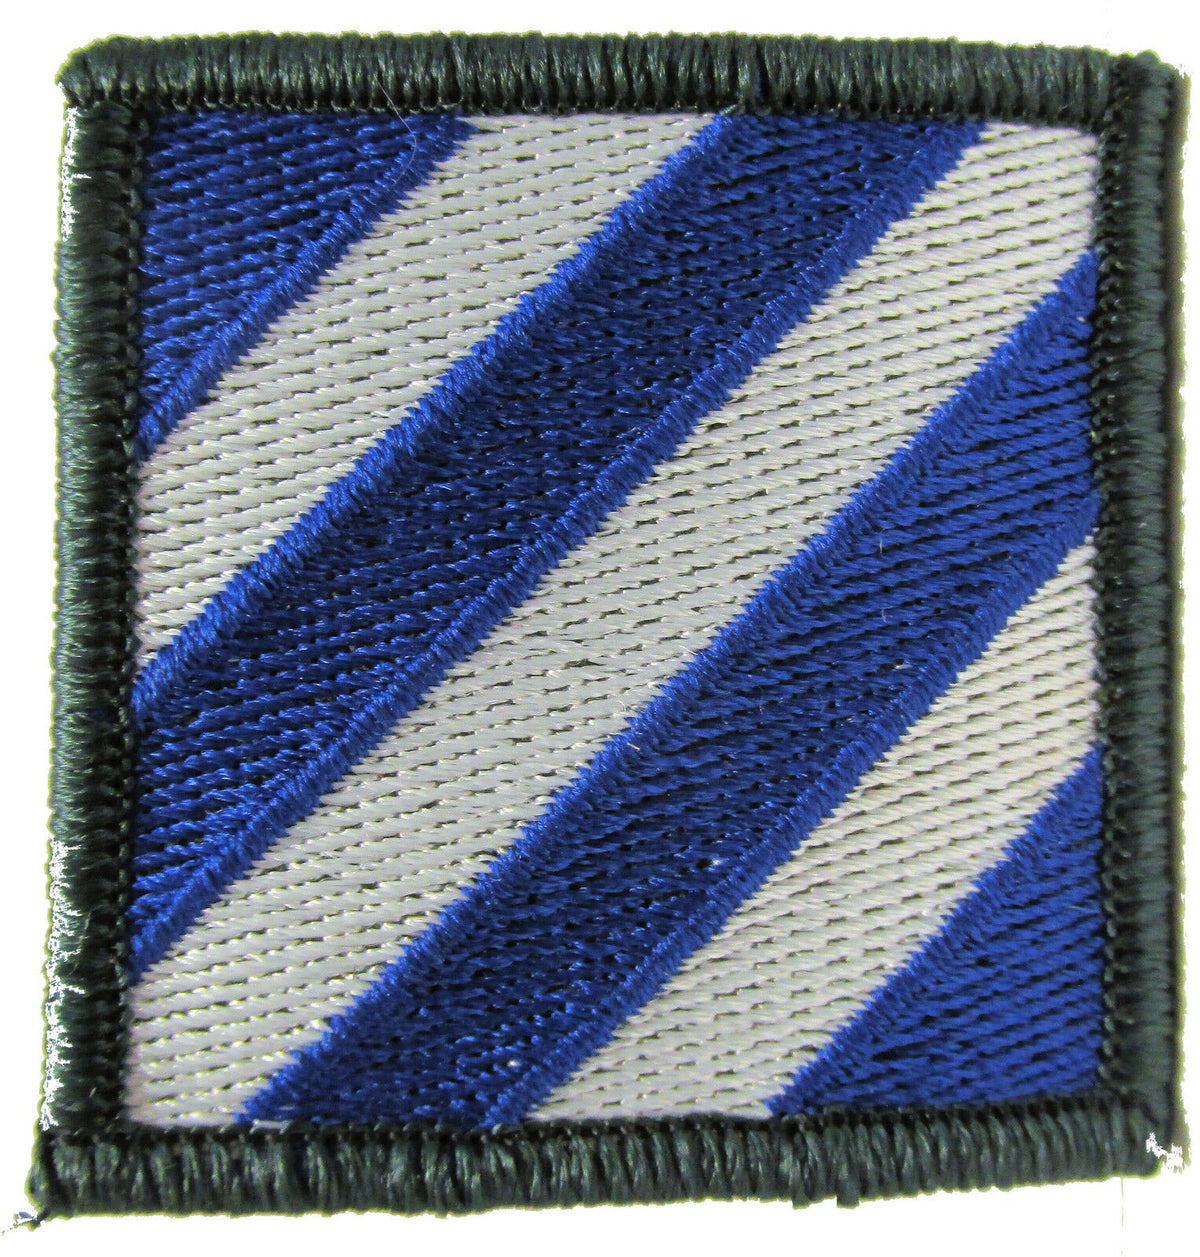 Lot of 10 - 1990s Military Surplus - 3rd Infantry Division Full Color Patch